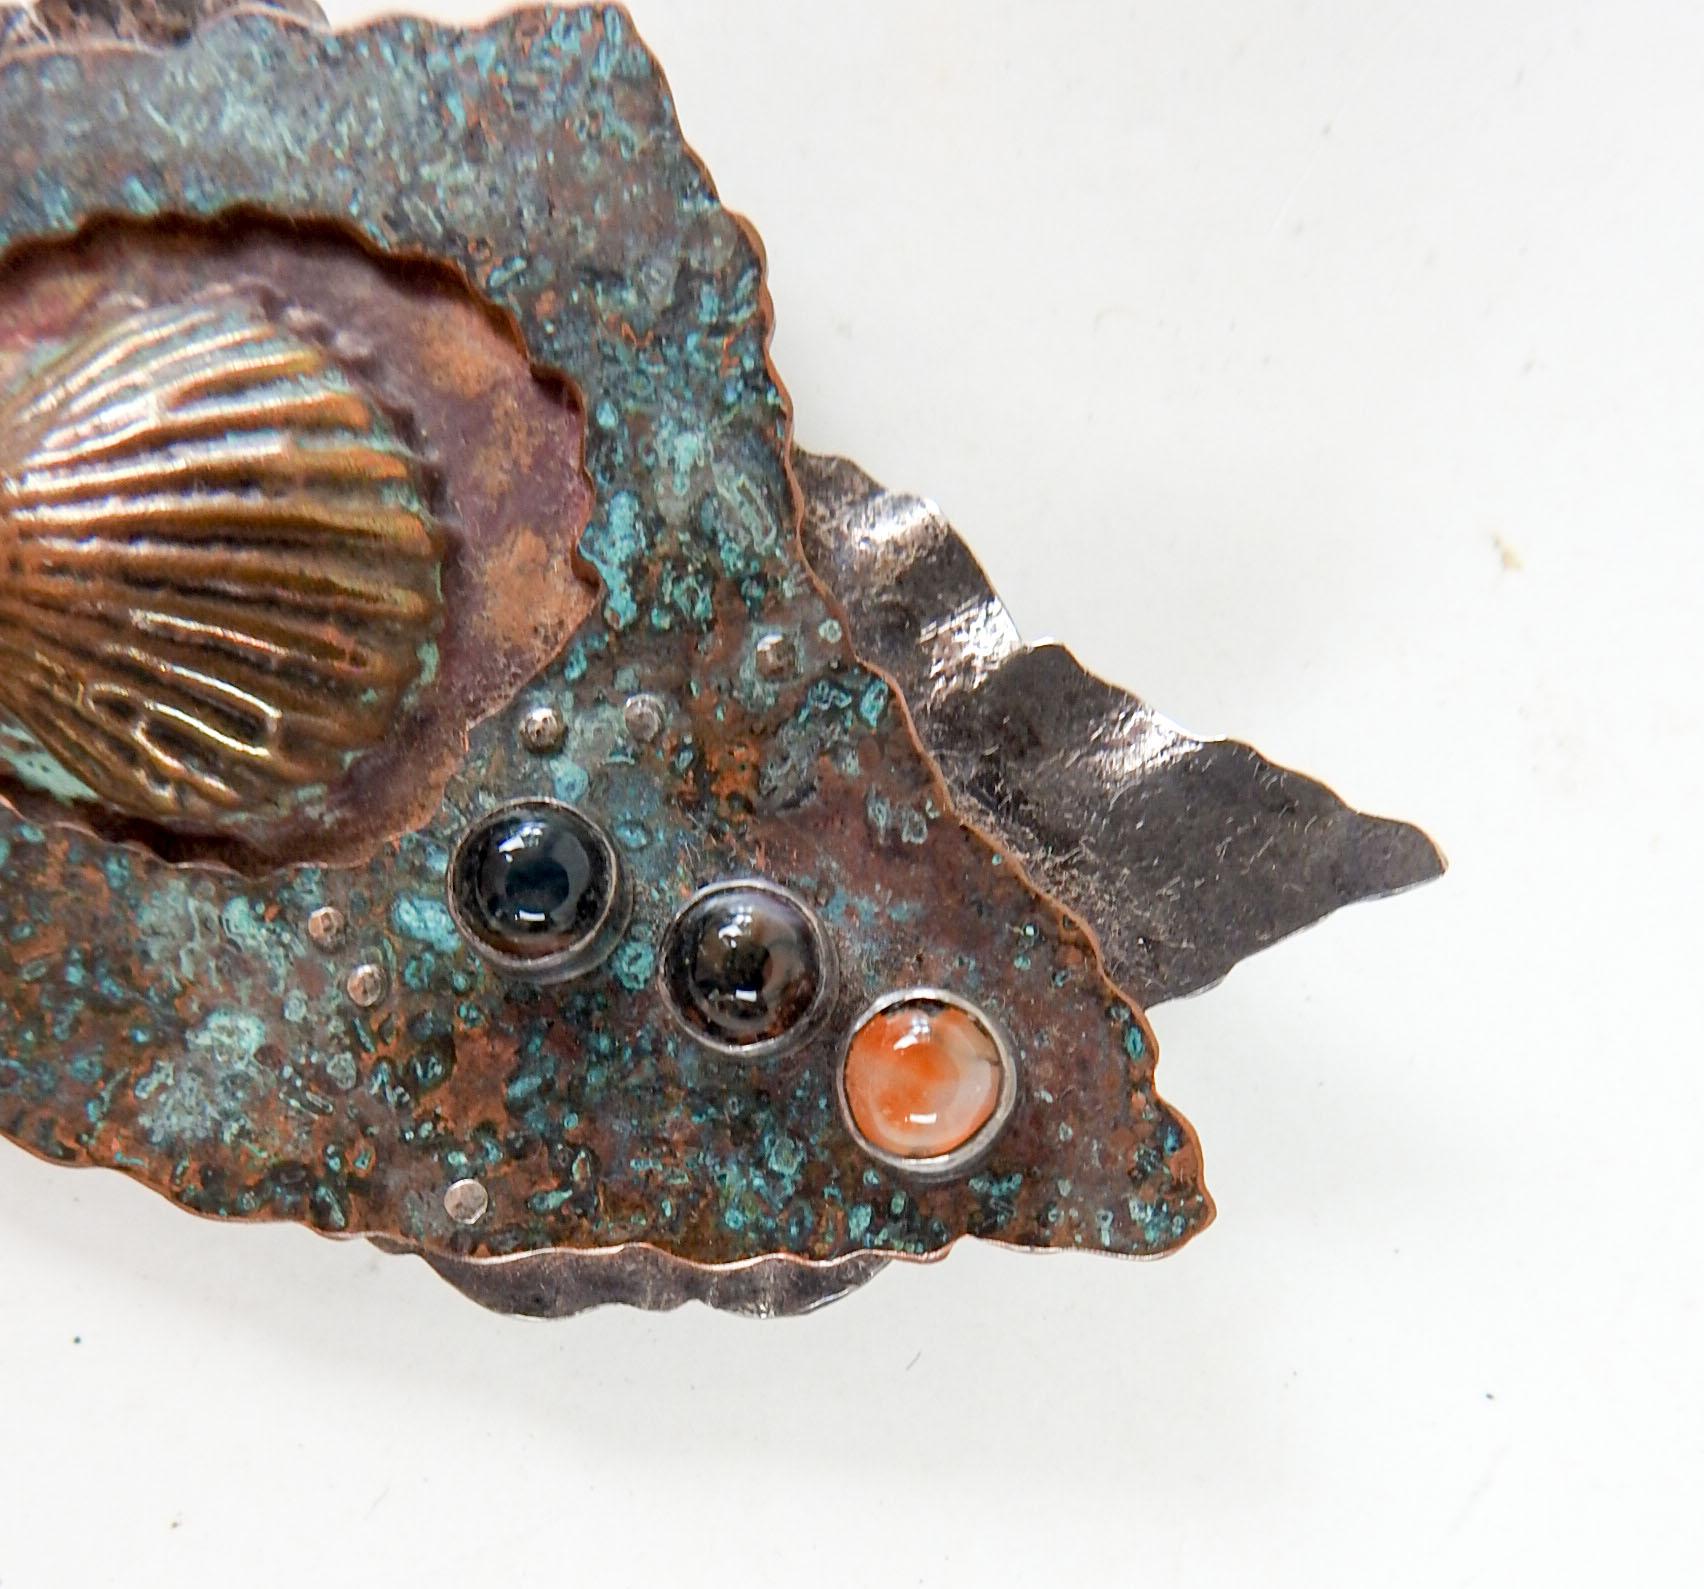 Large one of a kind circa 1990's artist made sterling silver and patinated copper brooch. Signed Linda Thompson (20th/21st century). Artistic dimensional copper relief shell with custom copper verdigris patina overlay, textured sterling silver